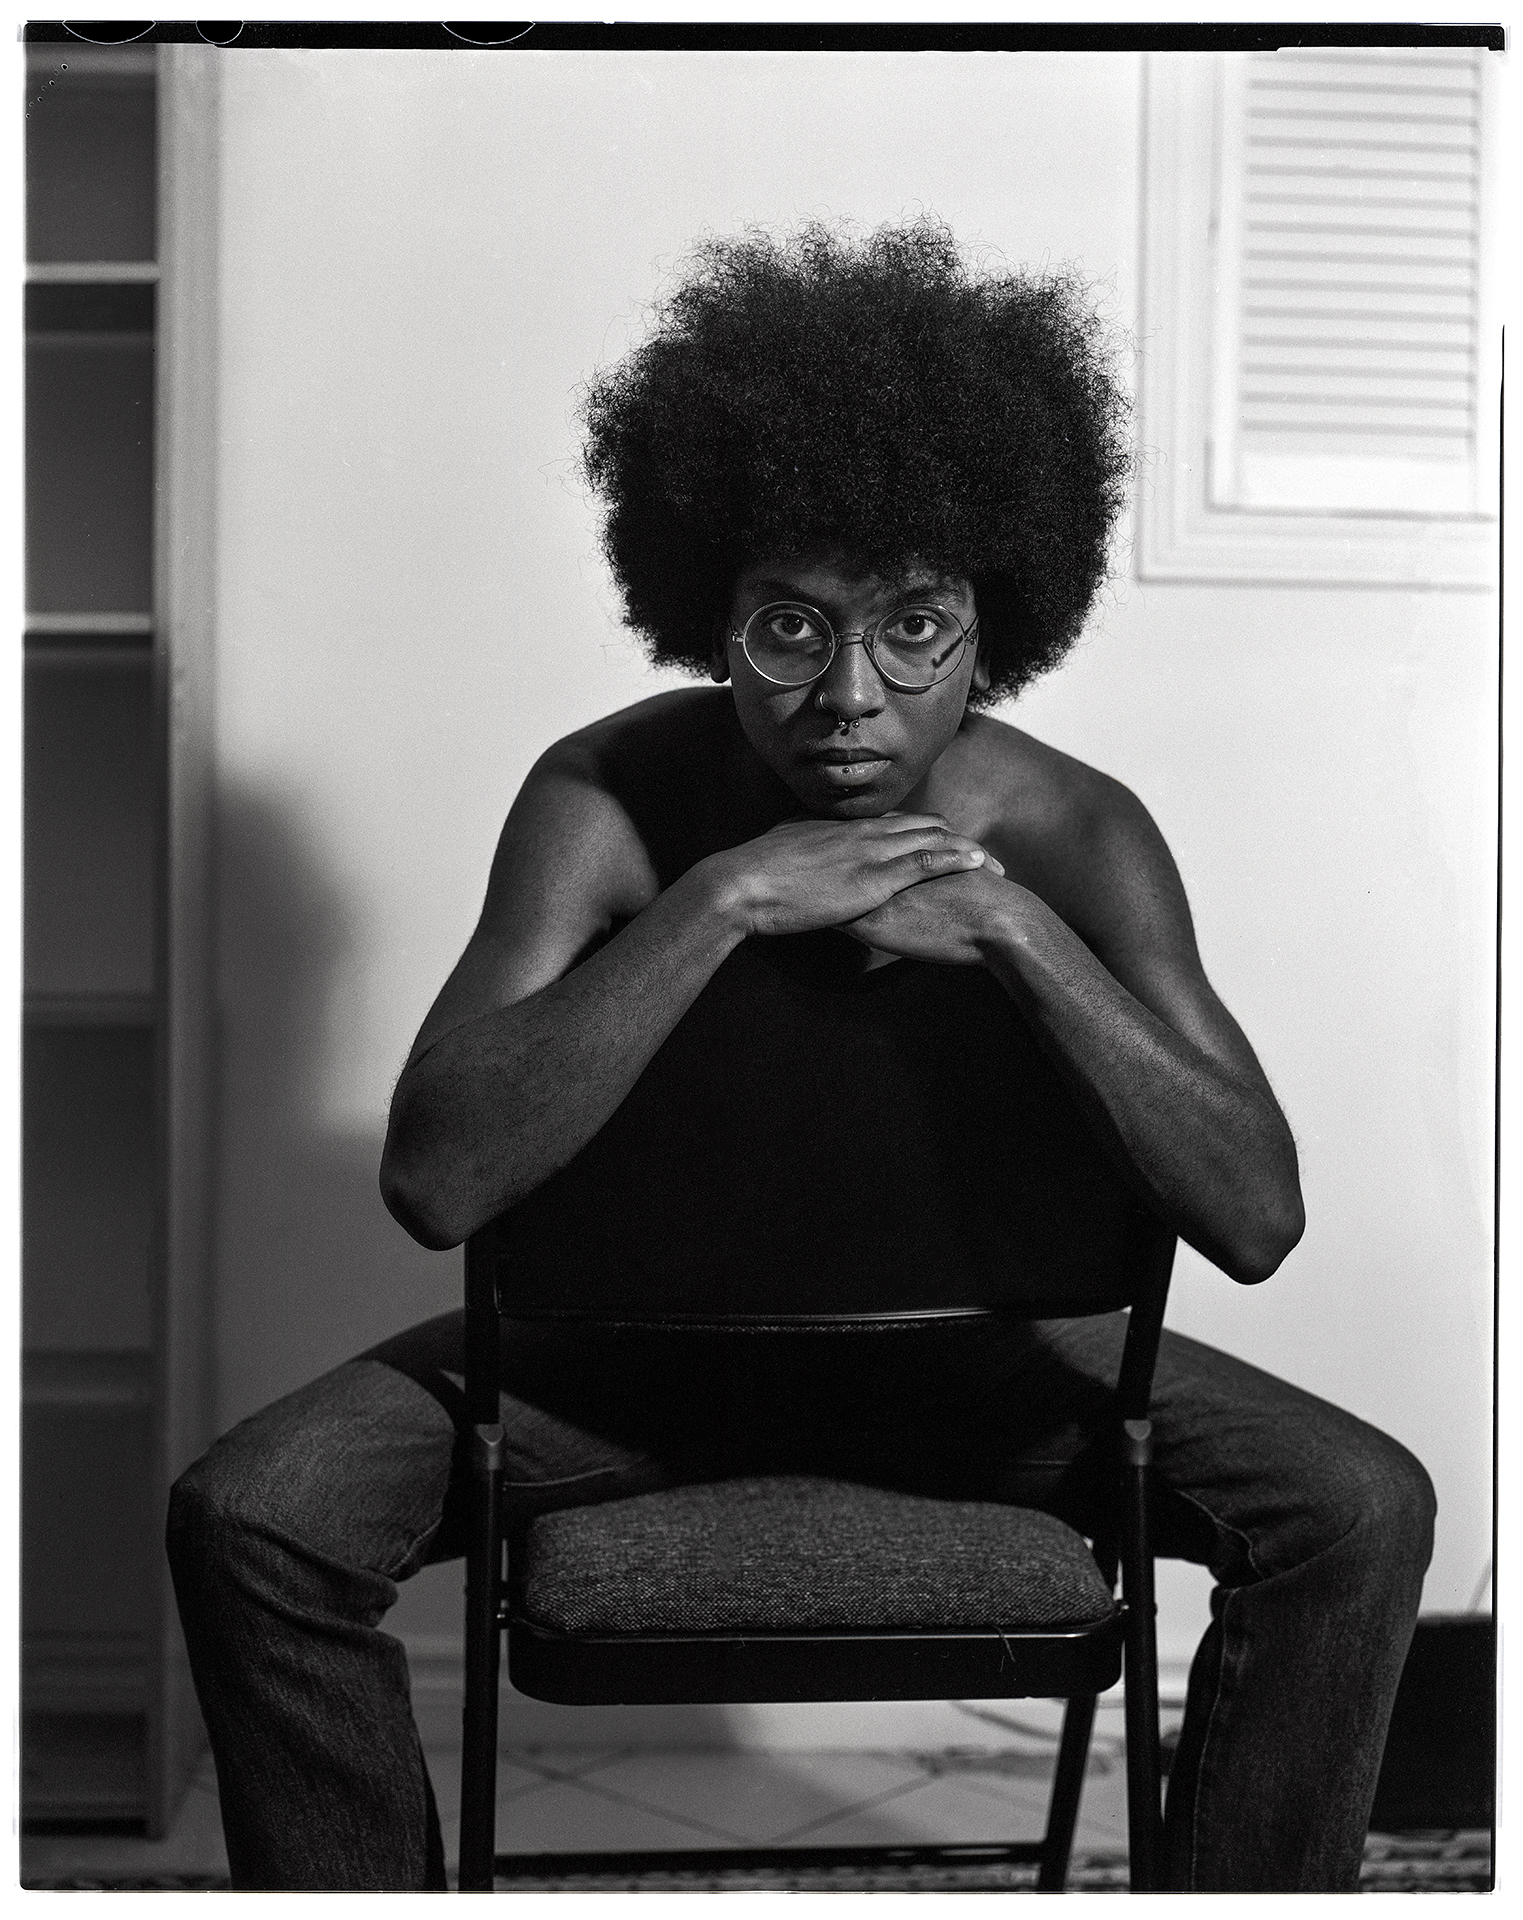 : A black and white image shot on film depicting Jayden, a person in their early 20’s with an afro. Jayden is laying shirtless on their bed. They are leaning back on their elbows while looking directly into the camera. They are wearing dark jeans and a belt.